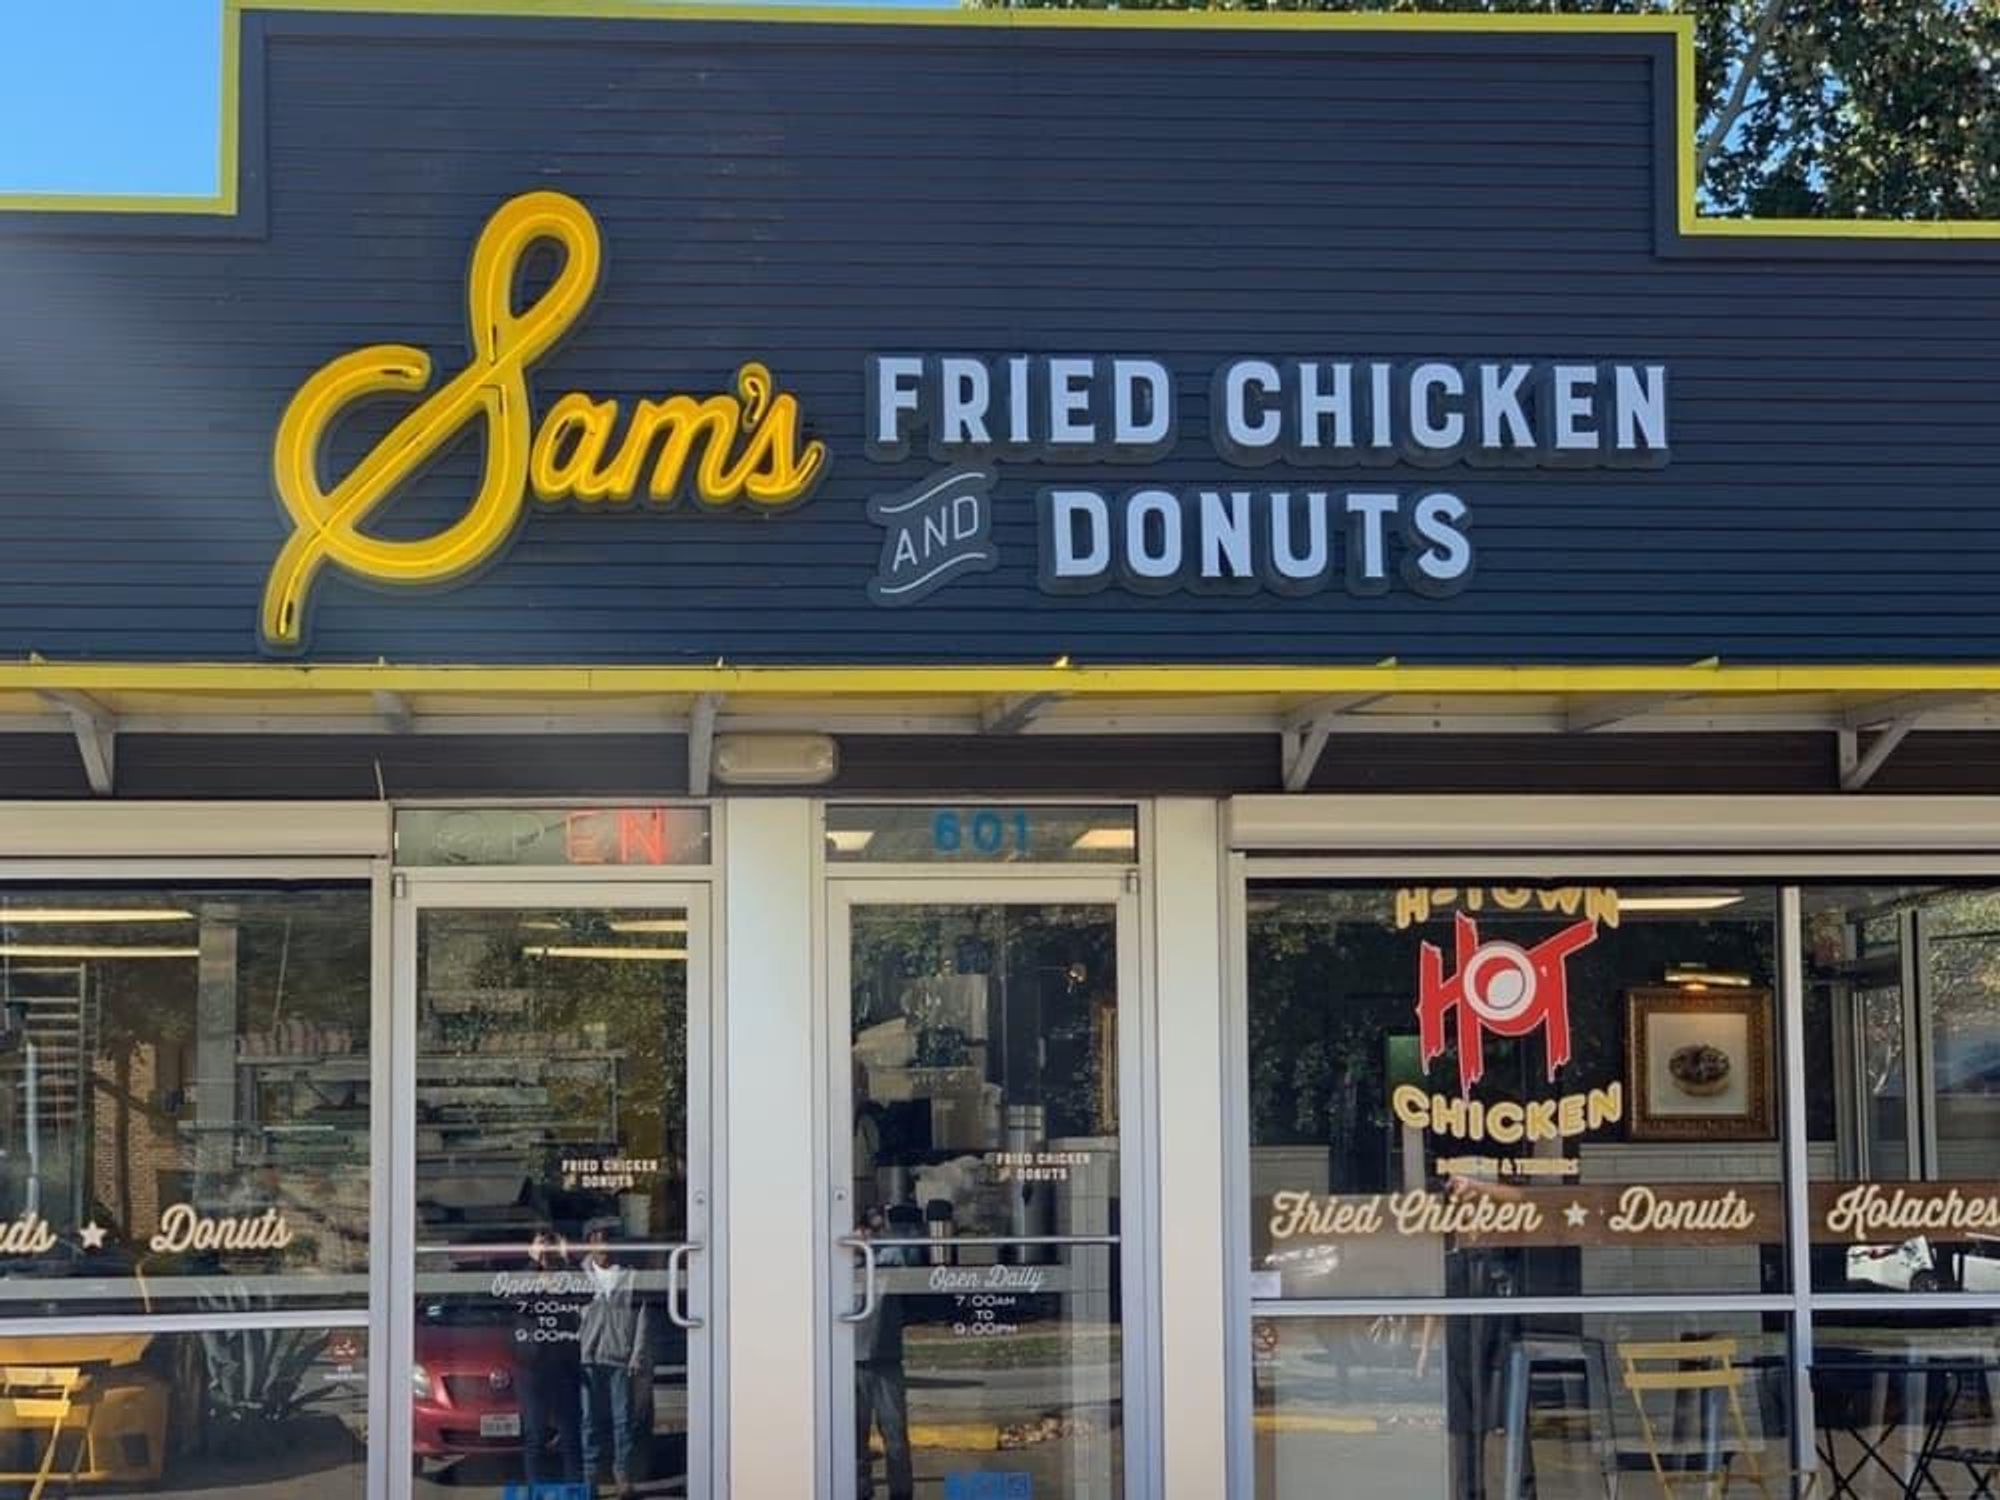 Sam's fried chicken & donuts exterior new sign